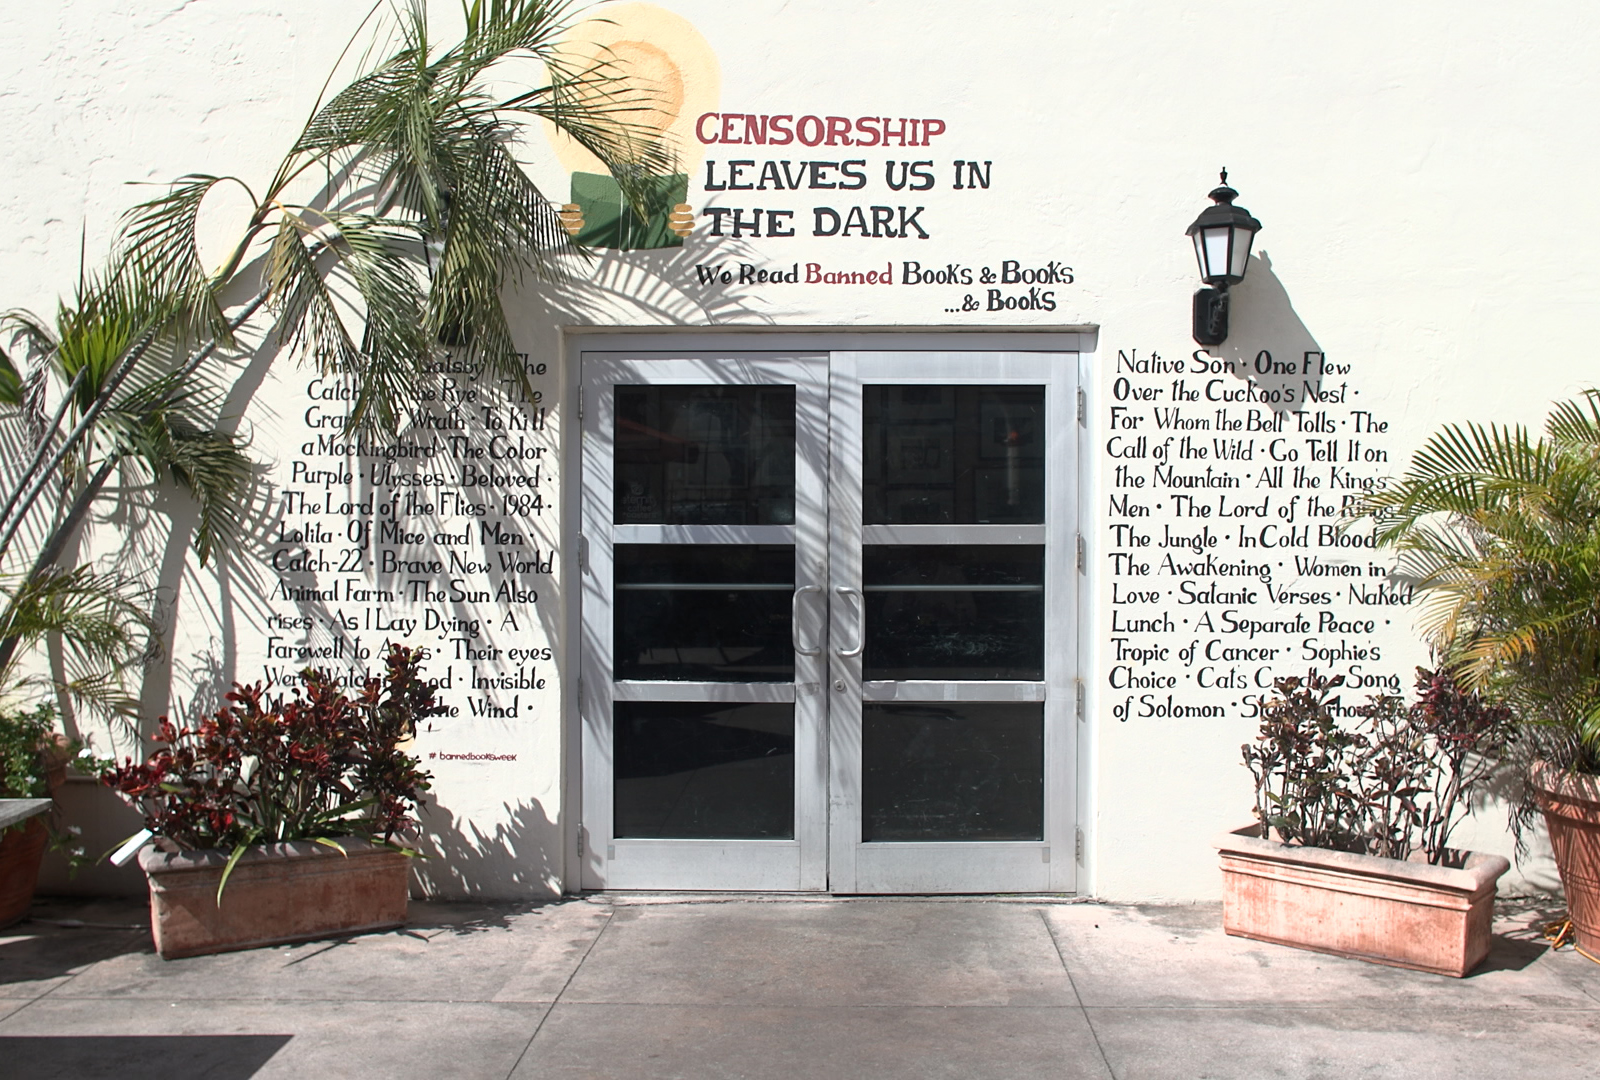 Books & Books’s “censorship leaves us in the dark” mural listing books banned from Florida public school libraries, Coral Gables, Florida.